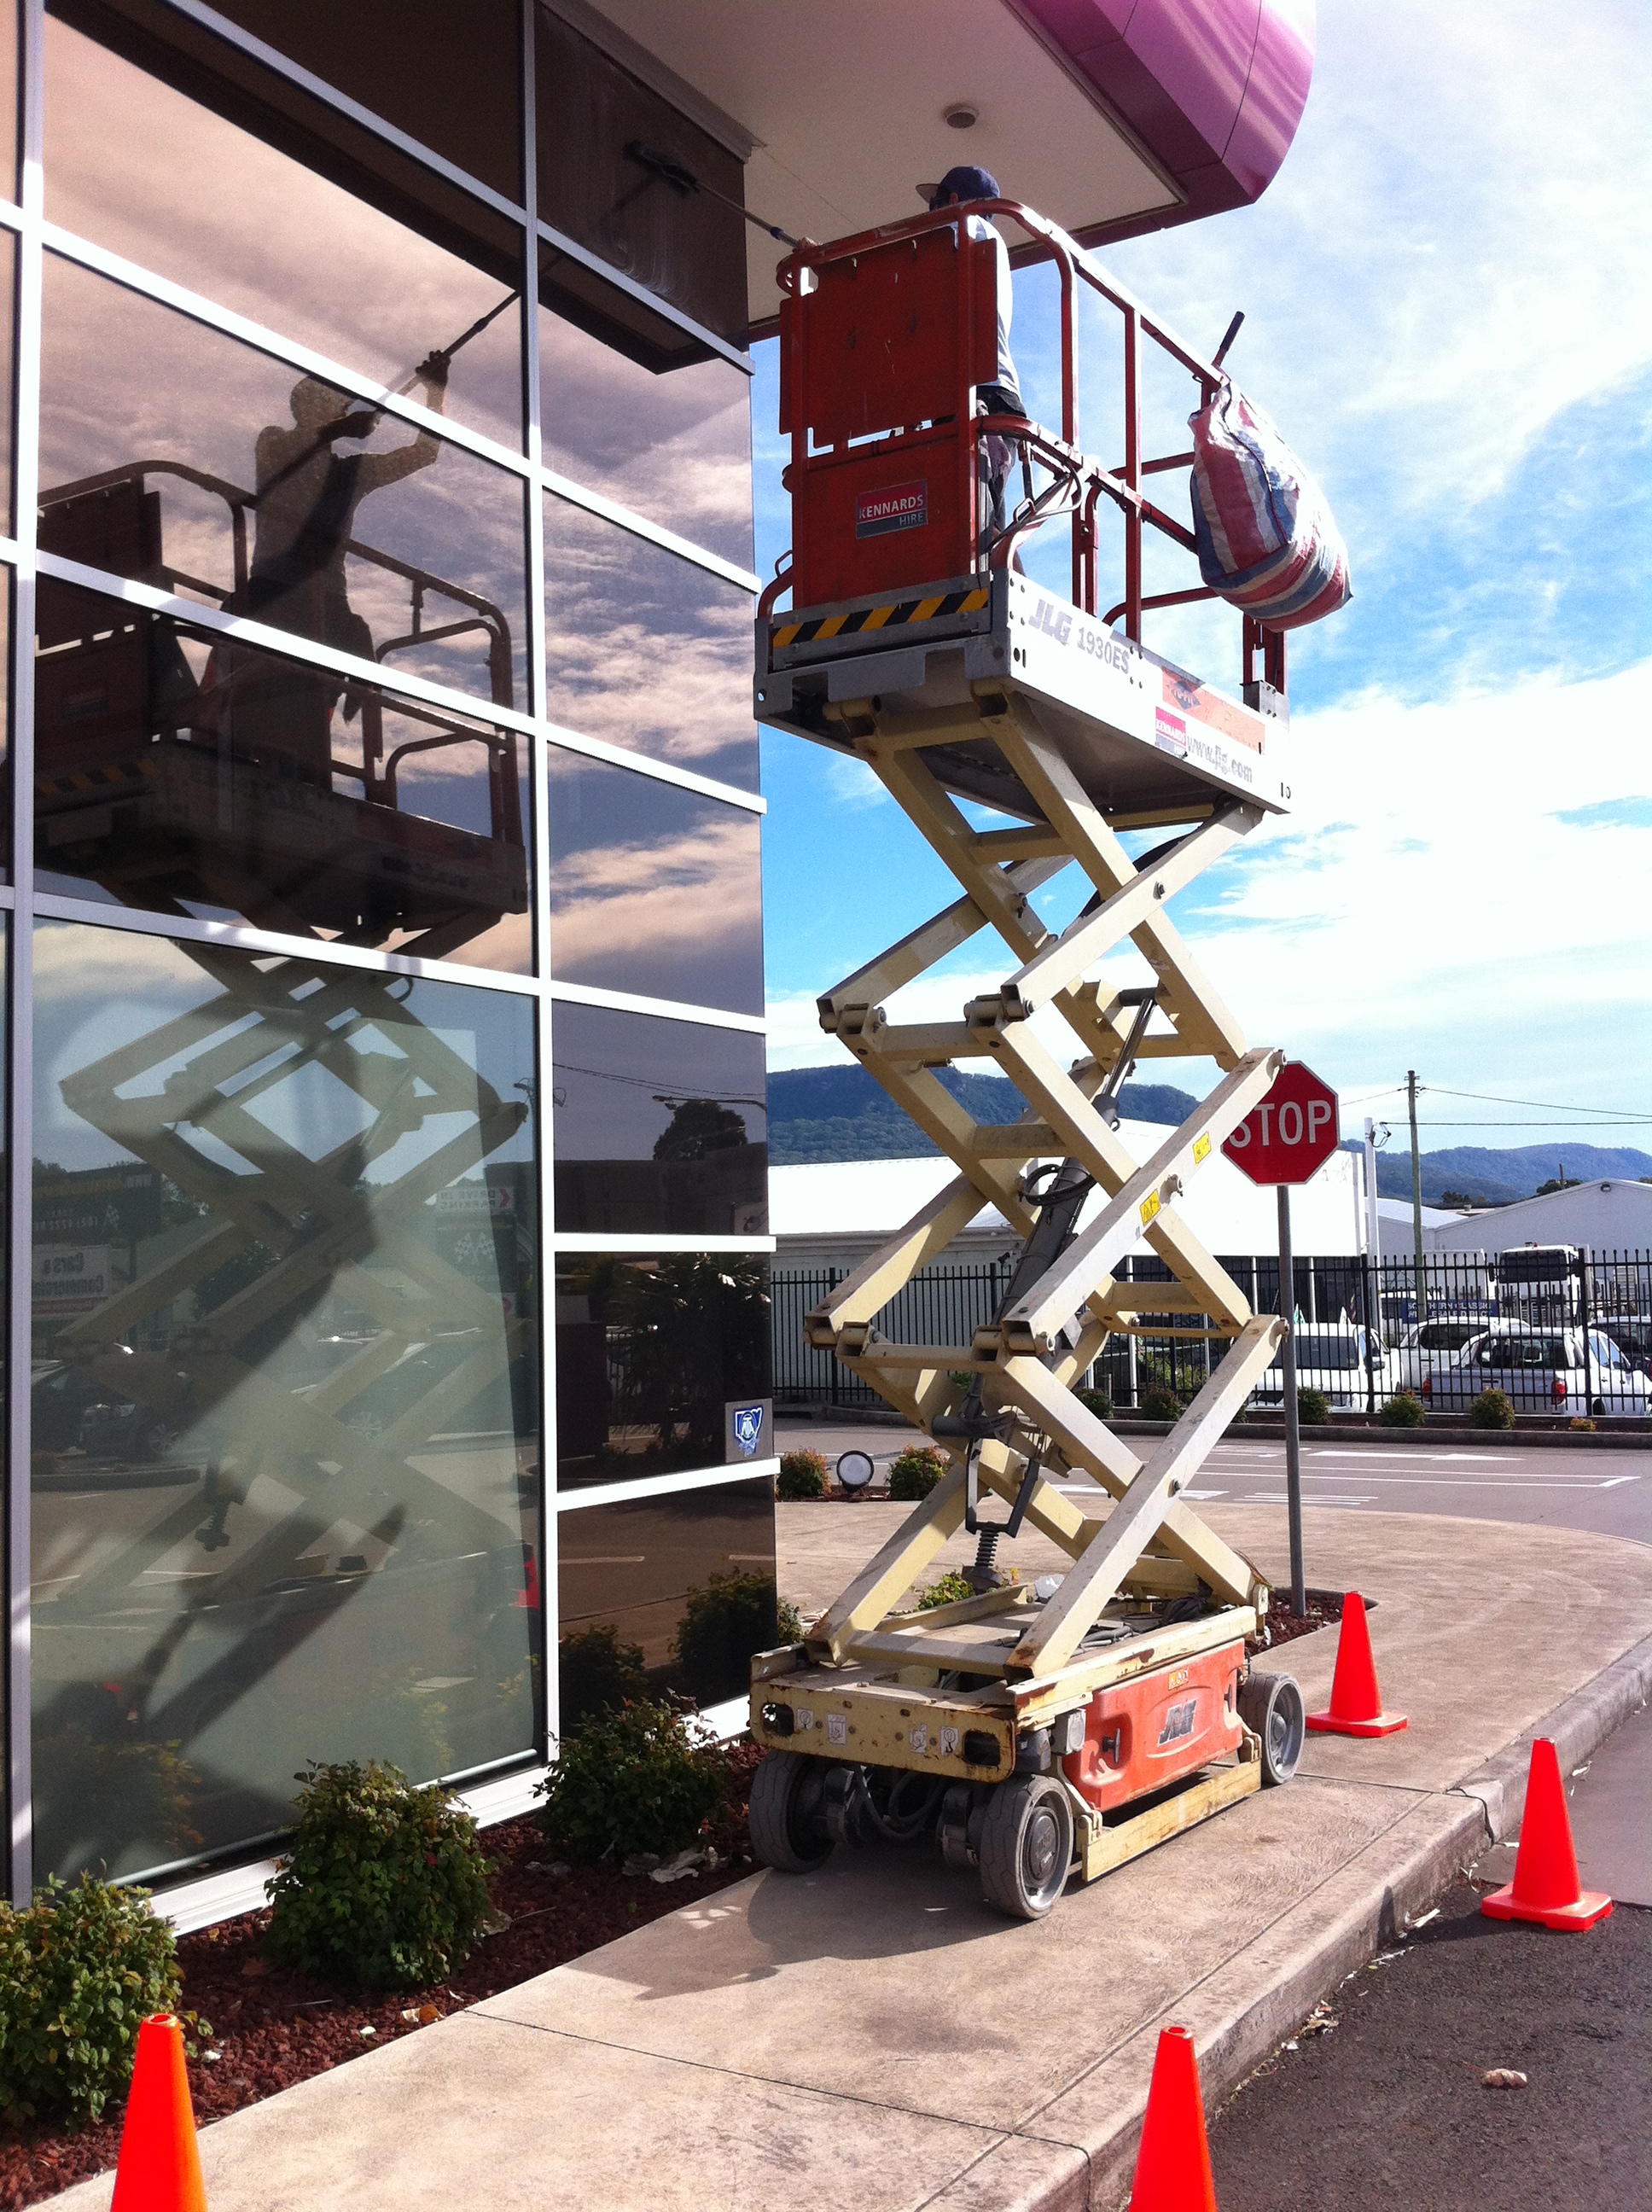 A scissor lift aerial work platform is being used to access high windows